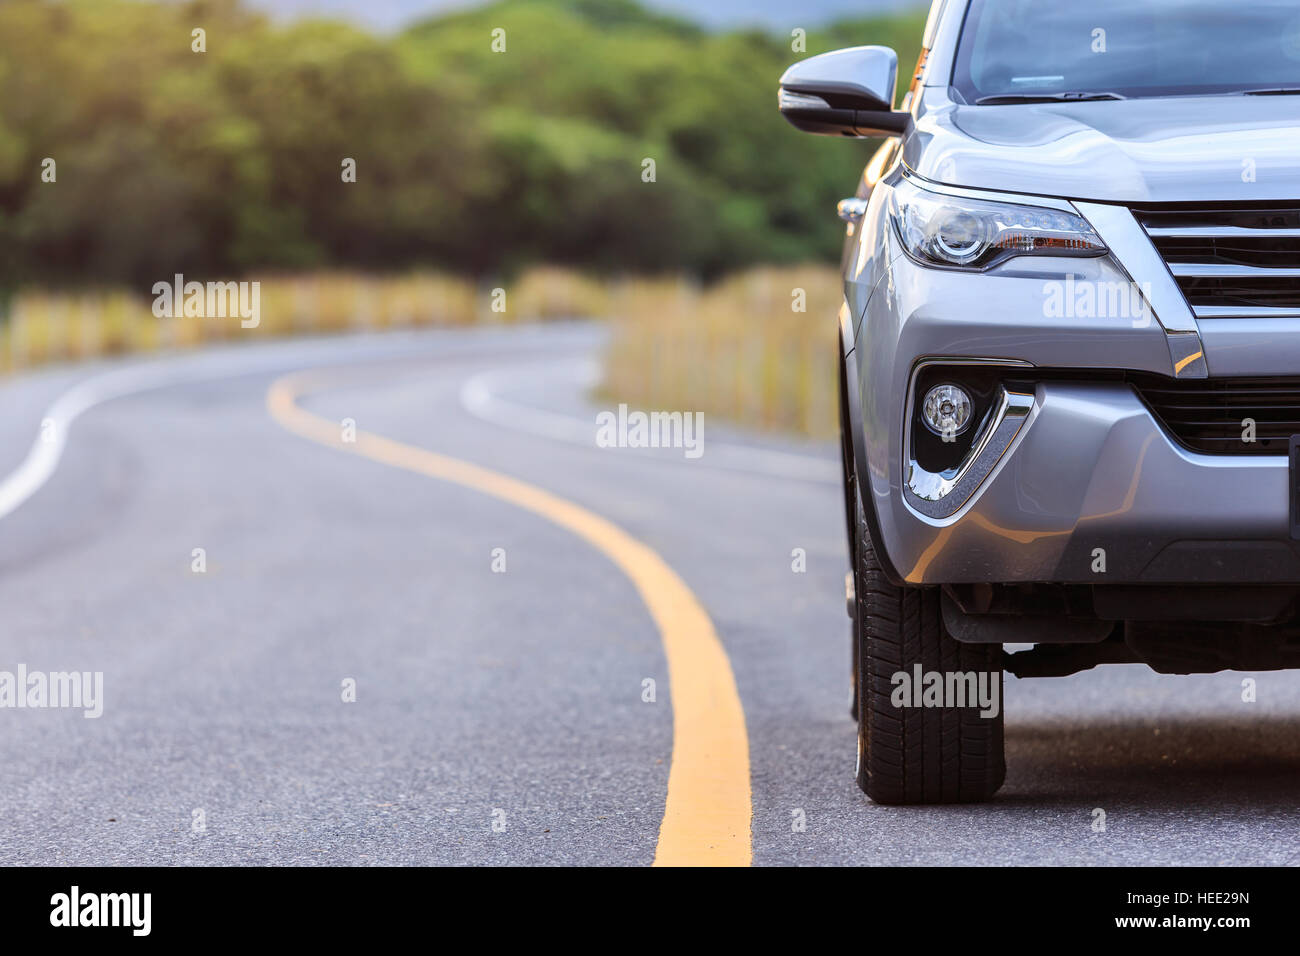 Front of new silver SUV car parking on the asphalt road Stock Photo